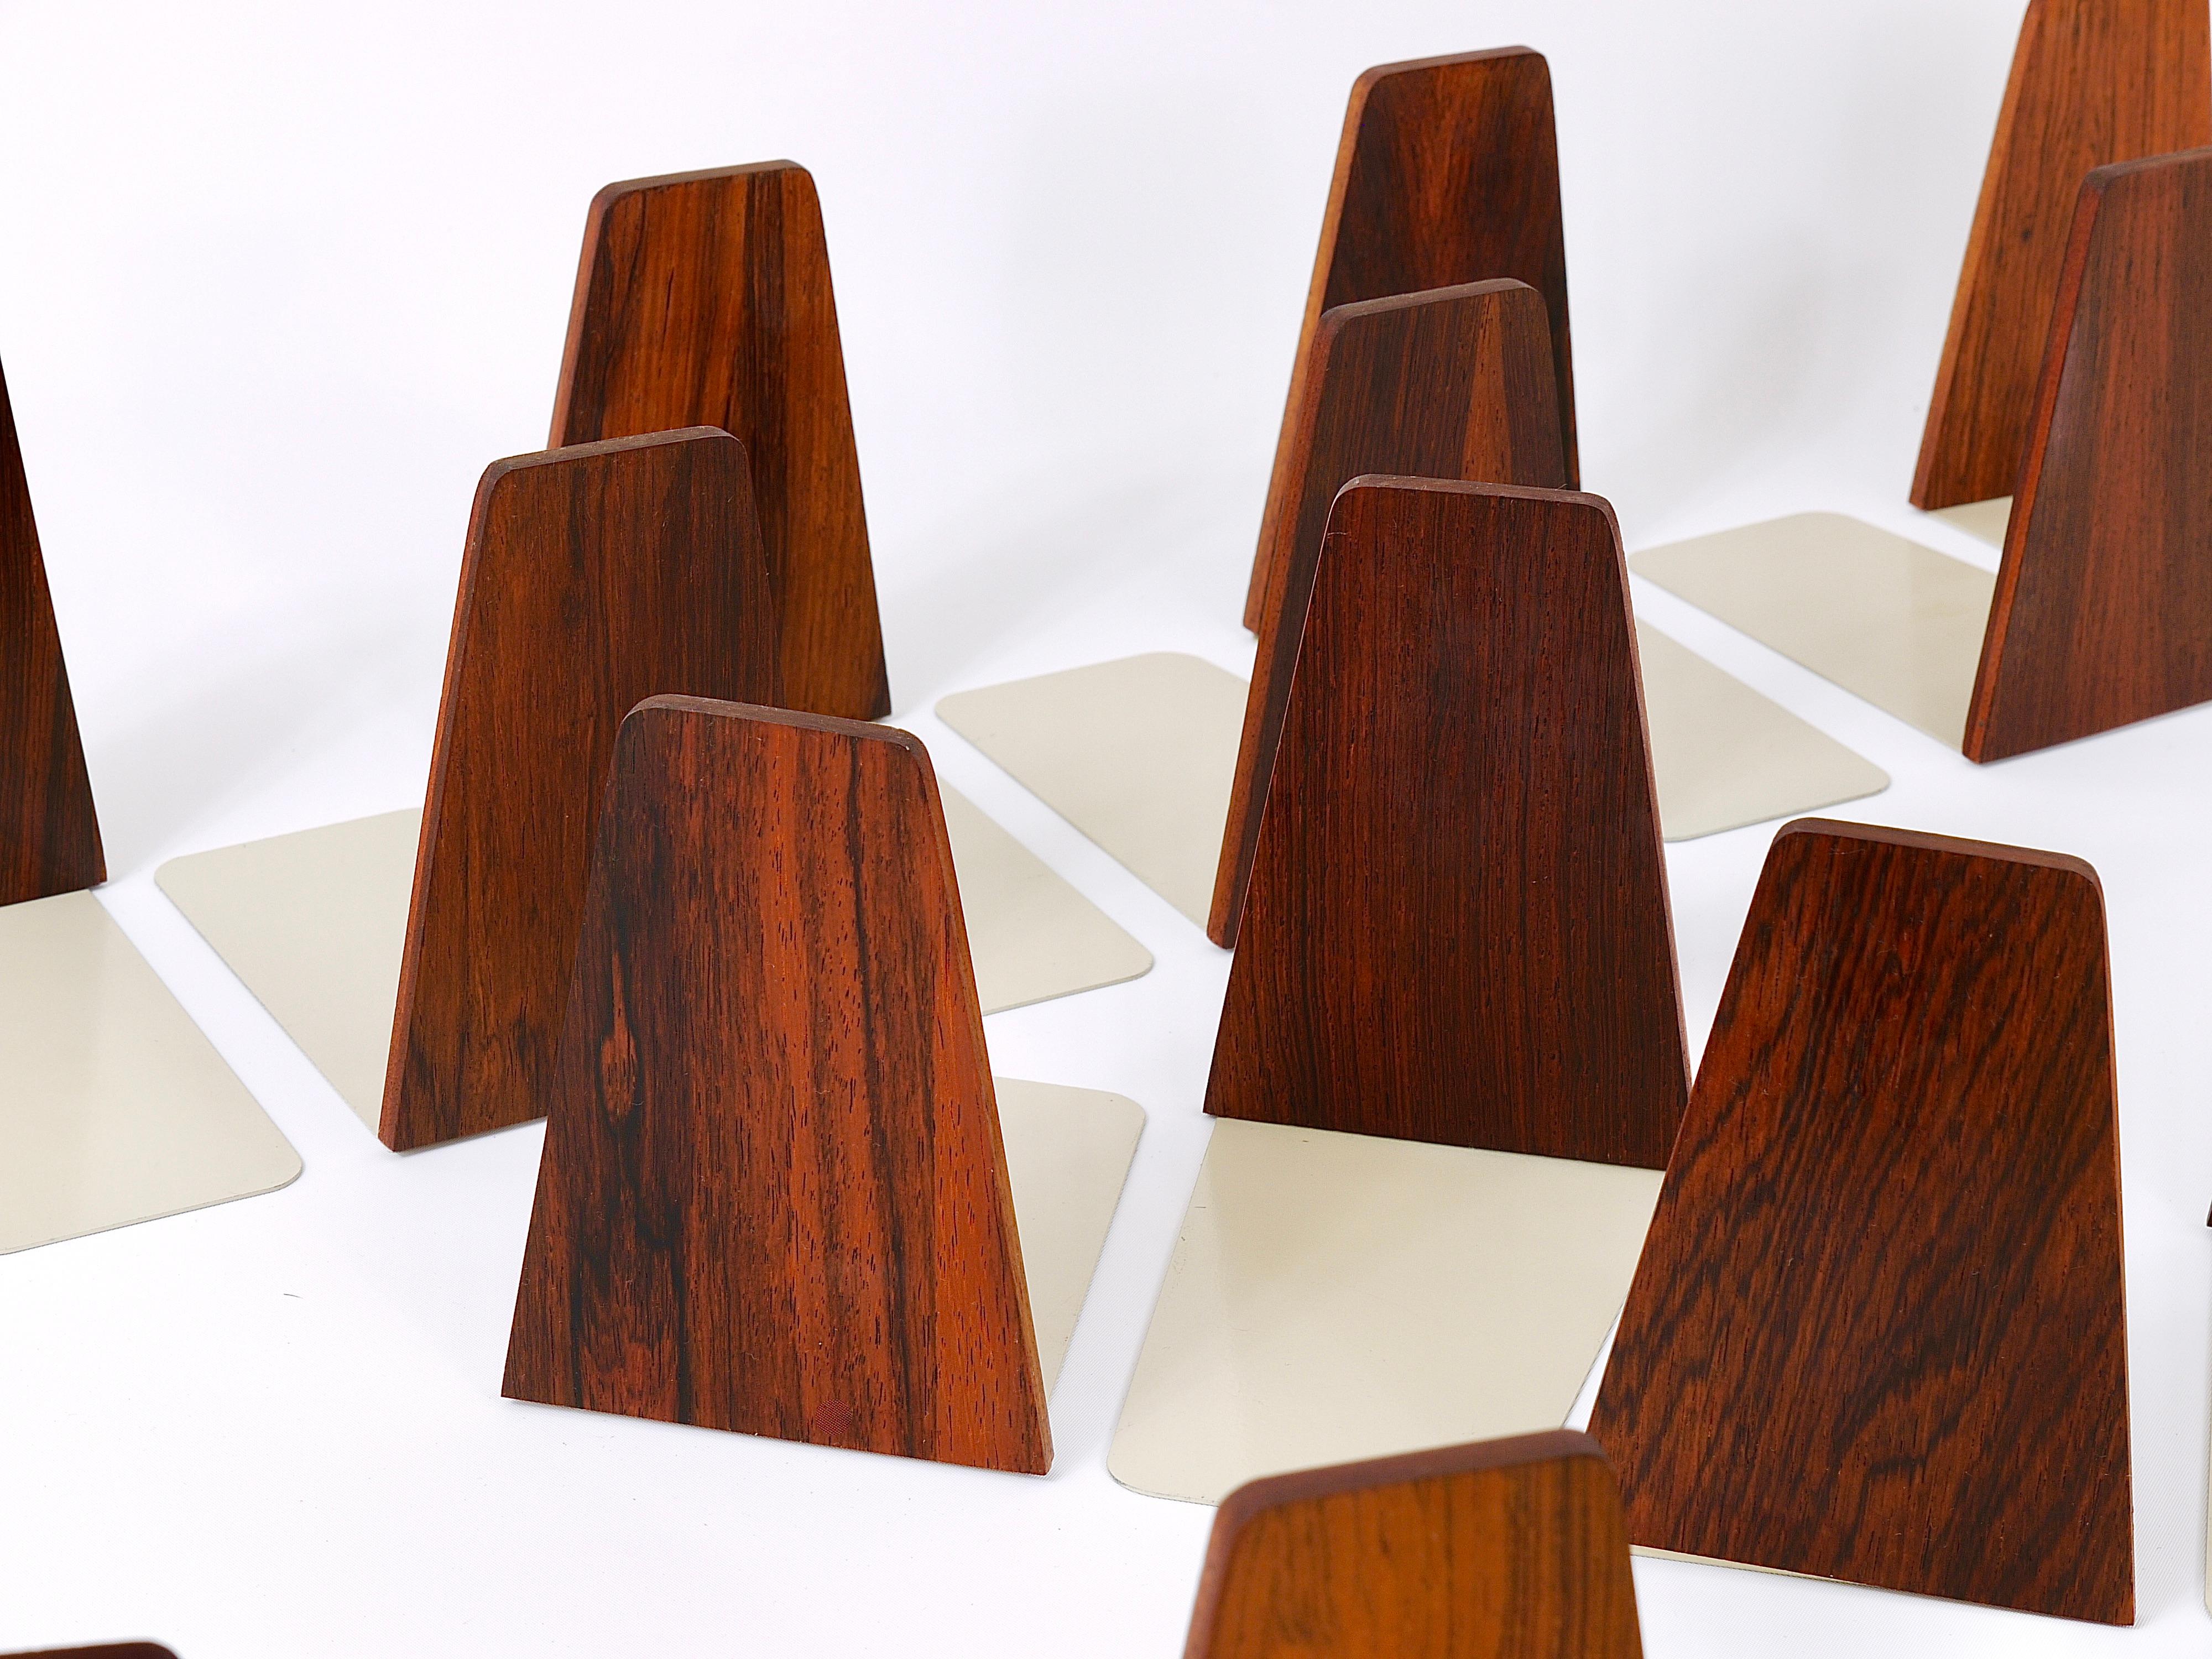 Up to five pairs of beautiful midcentury bookends, made in Denmark in the 1960s. Designed by Kai Kristiansen, executed by Fm Moebler, Made of lovely grained rose wood with grey lacquered metal bases. In very good condition, with marginal signs of